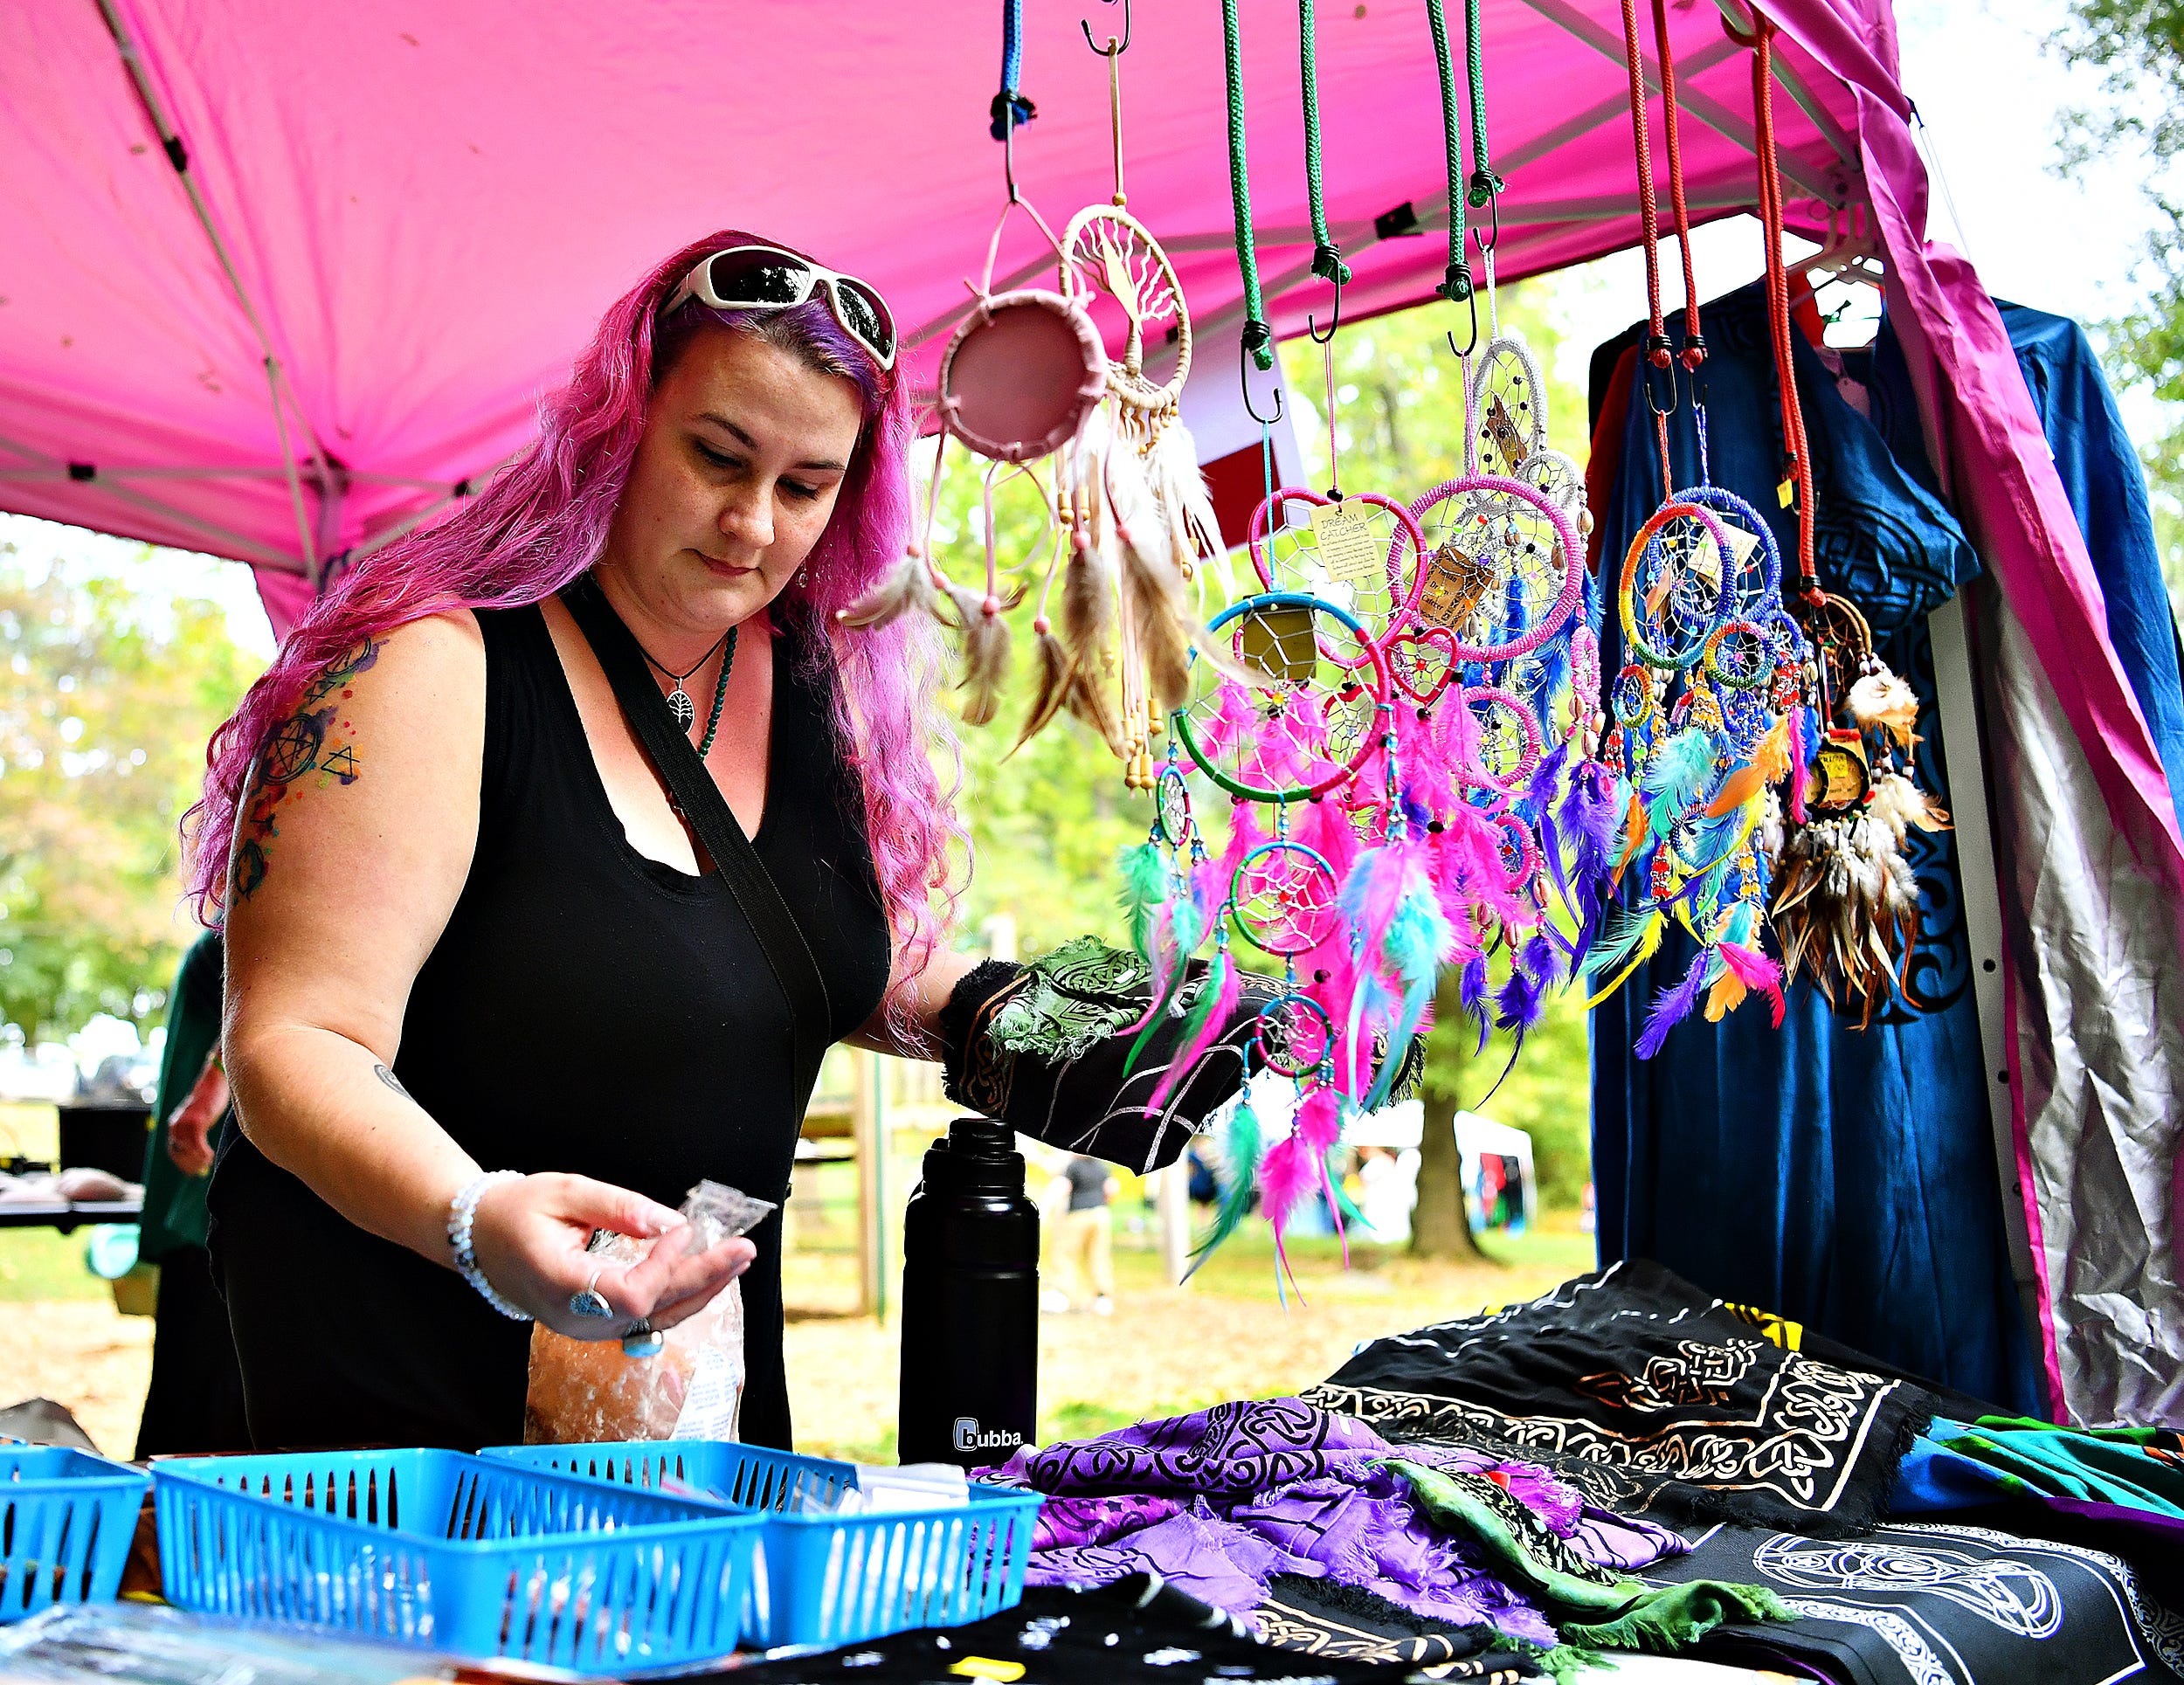 Marianne Hawkspirit, of Shermansdale in Perry County, shops at the Needful Things vendor tent during the 8th annual Pagan Pride Festival at Samuel S. Lewis State Park in Lower Windsor Township, Saturday, Sept. 28, 2019. Dawn J. Sagert photo